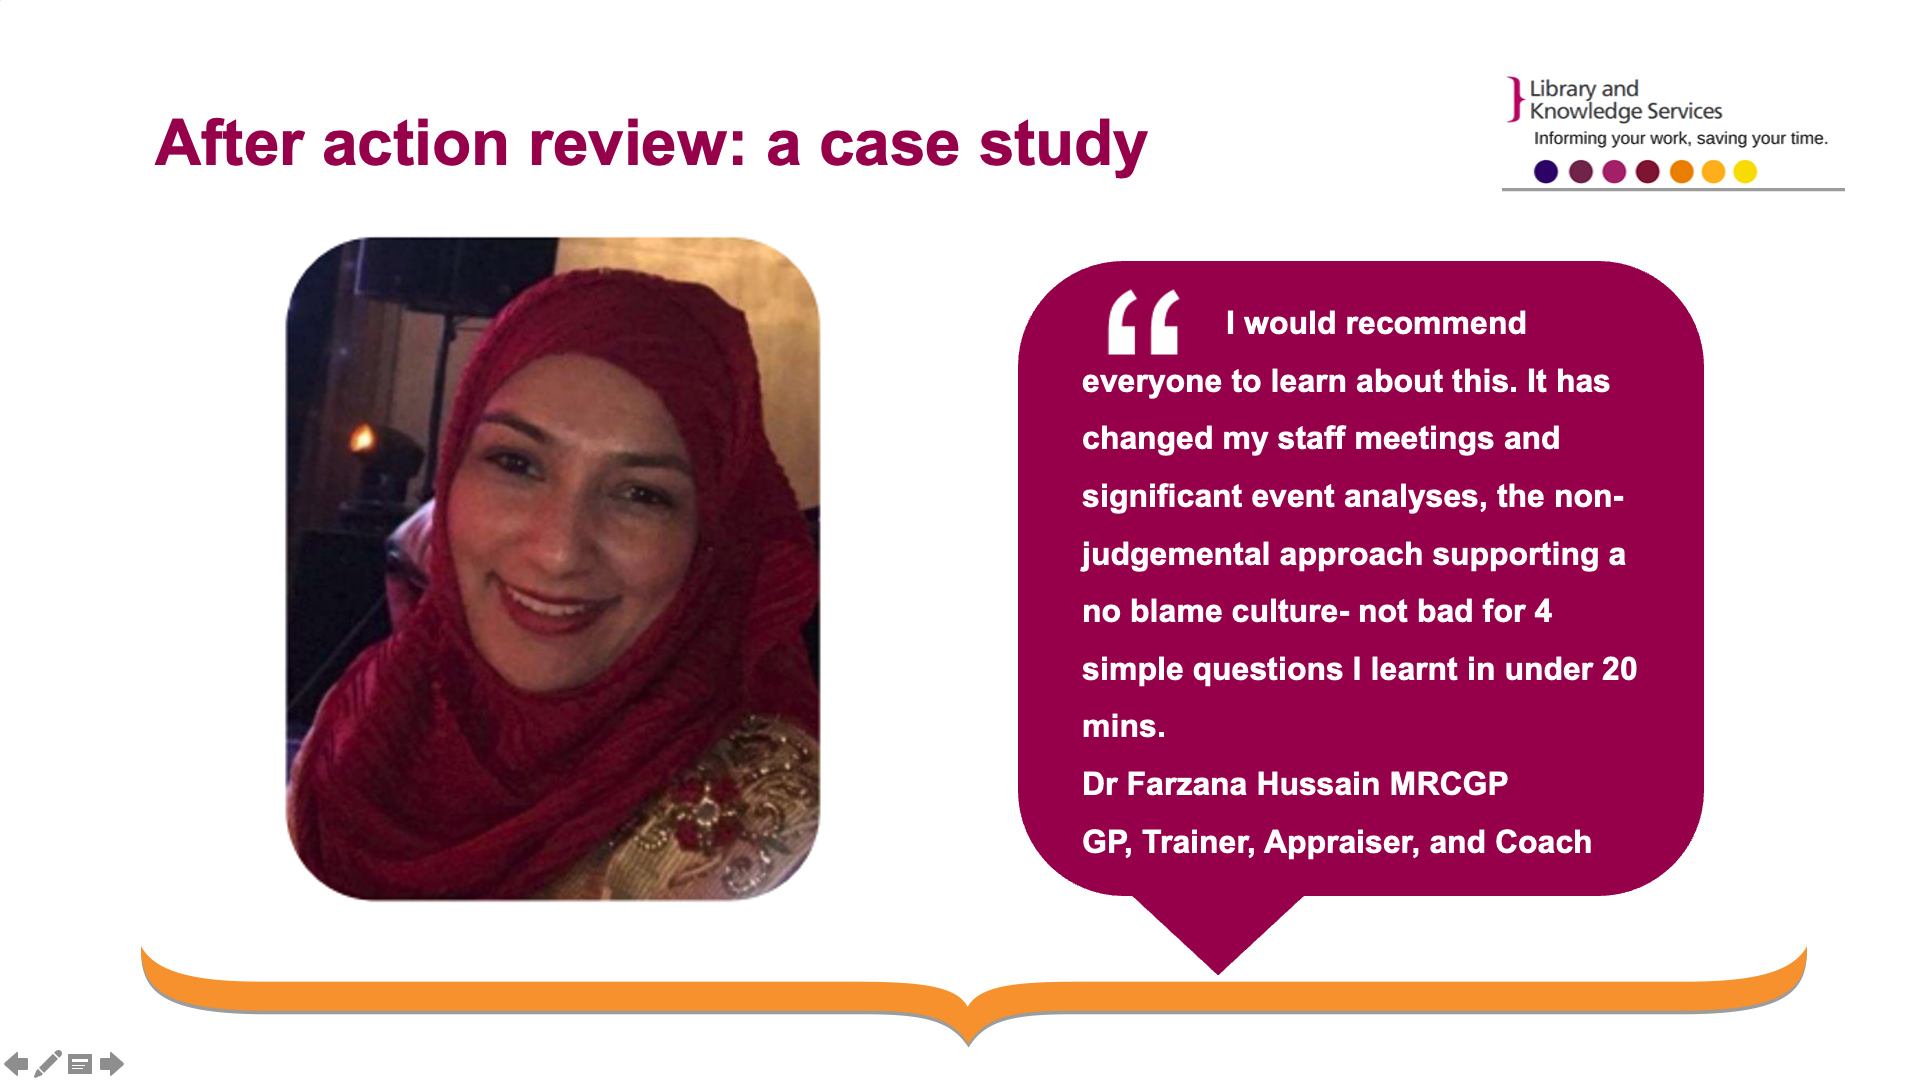 Title: After action review: a case study. Image of Dr Farzana Hussain. Her statement in quotations next to her image: I would recommend everyone to learn about this. It has changed my staff meetings and significant event analyses, the non-judgemental approach supporting a no blame culture- not bad for 4 simple questions I learnt in under 20 mins. - Dr Farzana Hussain MRCGP  GP, Trainer, Appraiser, and Coach